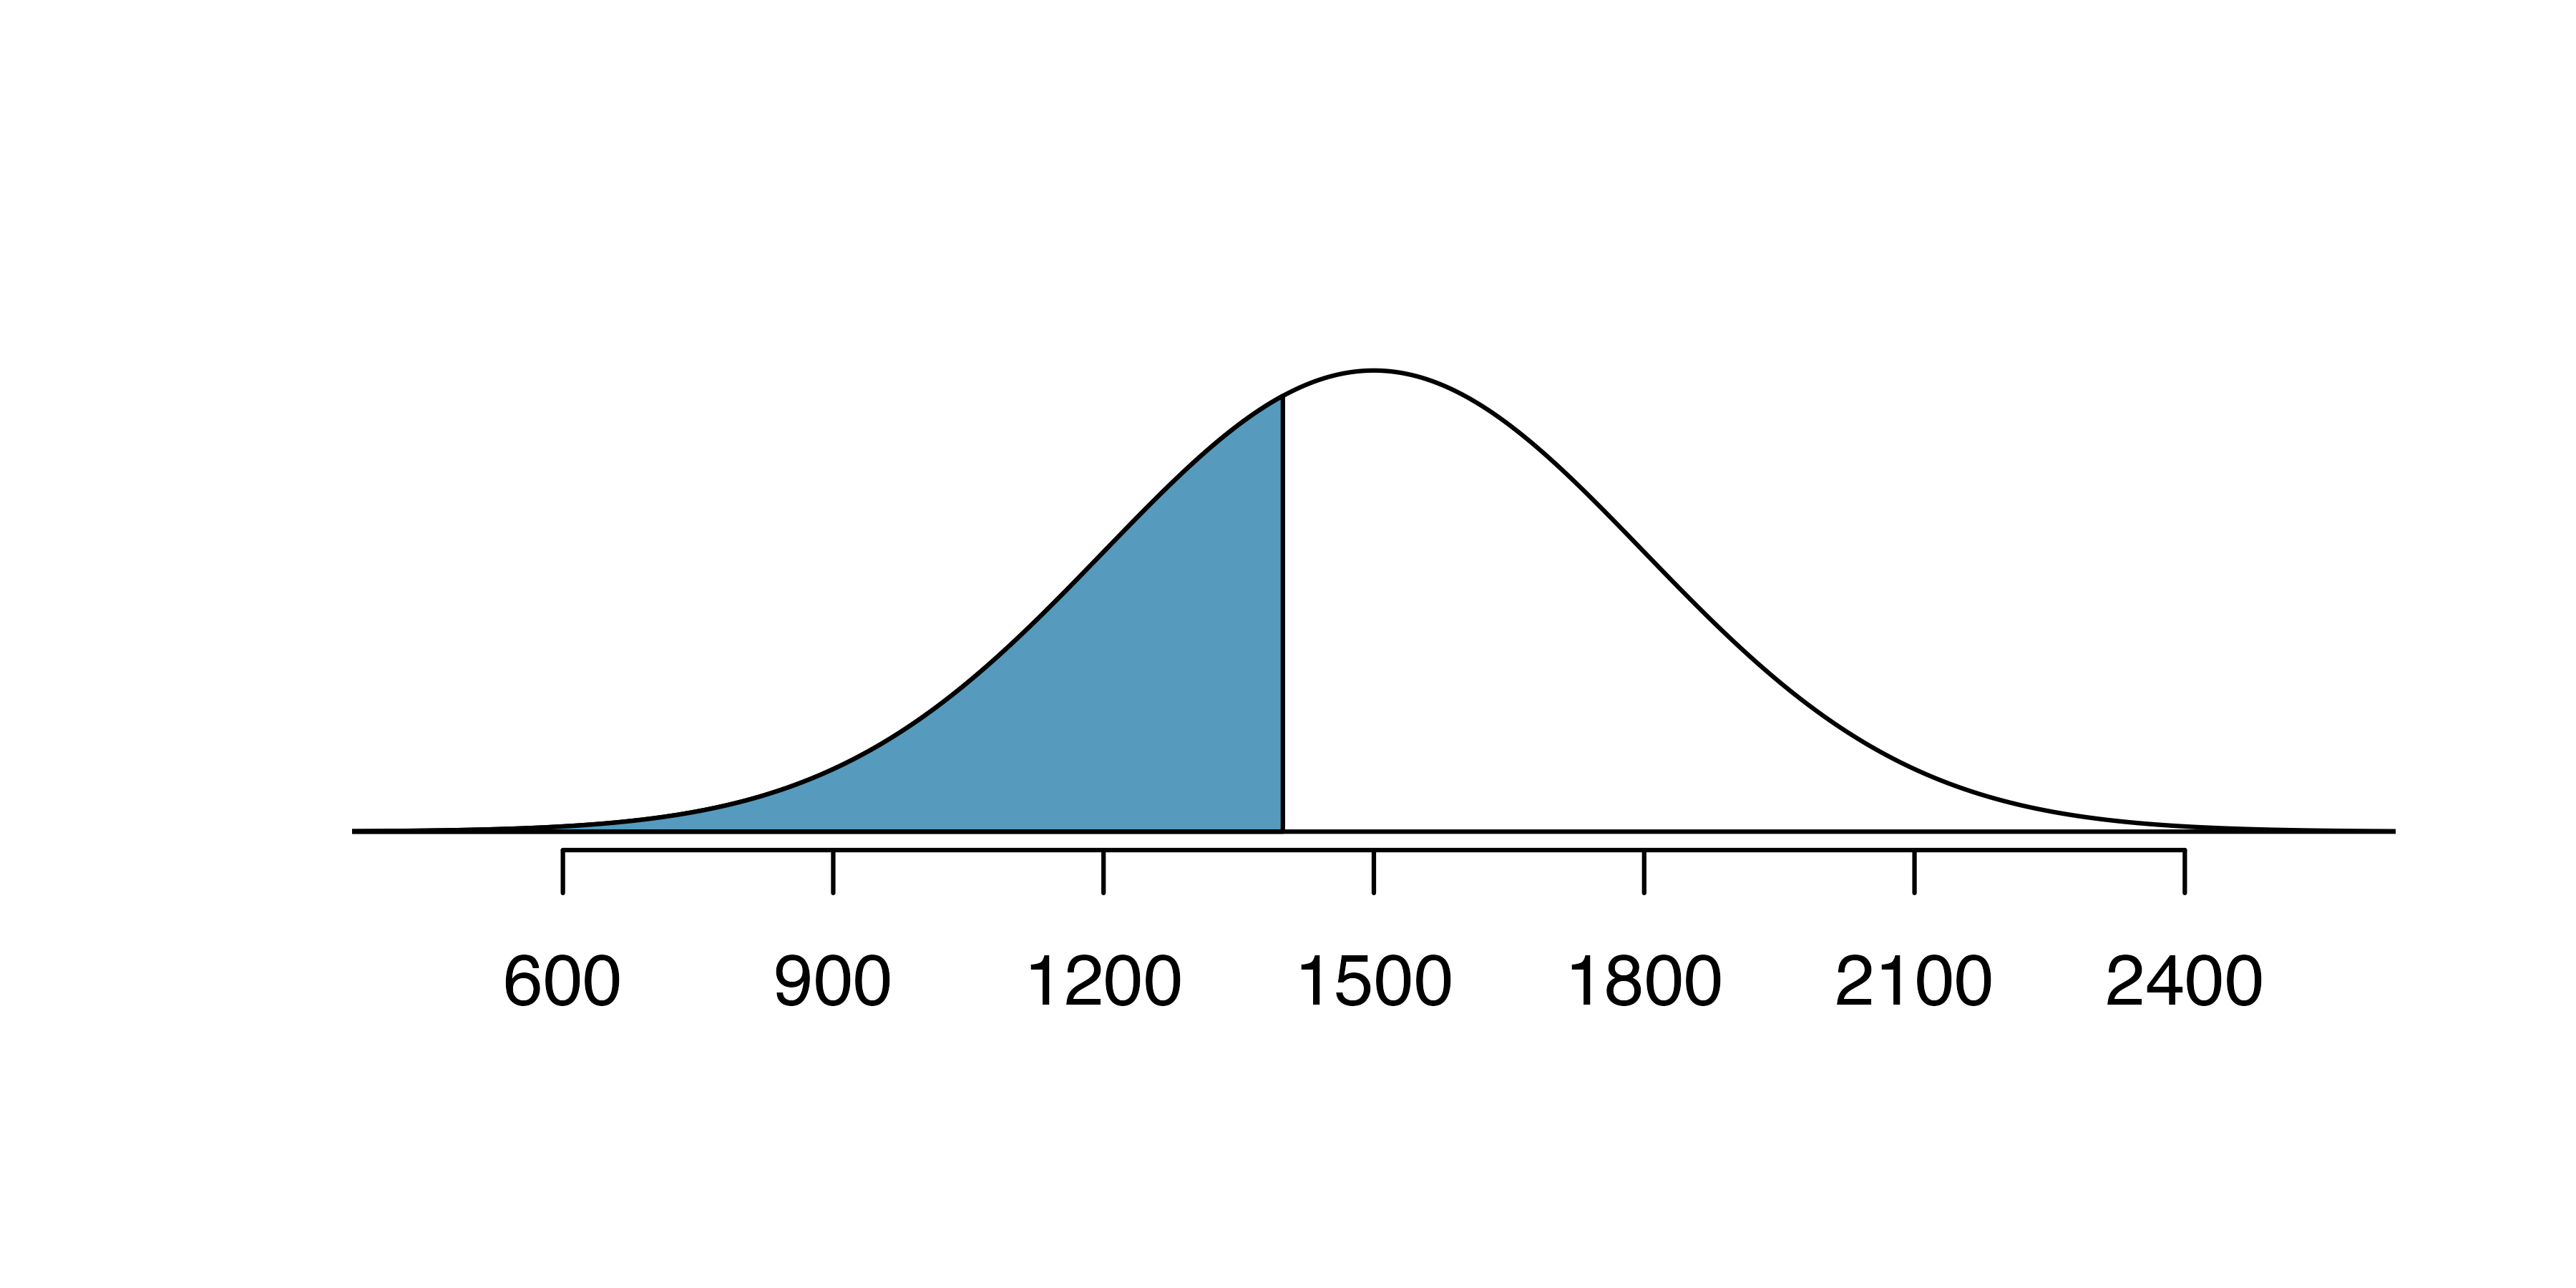 A normal curve with a mean of 1500 and a standard deviation of 300.  Values less than 1400 are shaded blue in the lower part of the curve. The shaded part is roughly 37 percent of the graph.